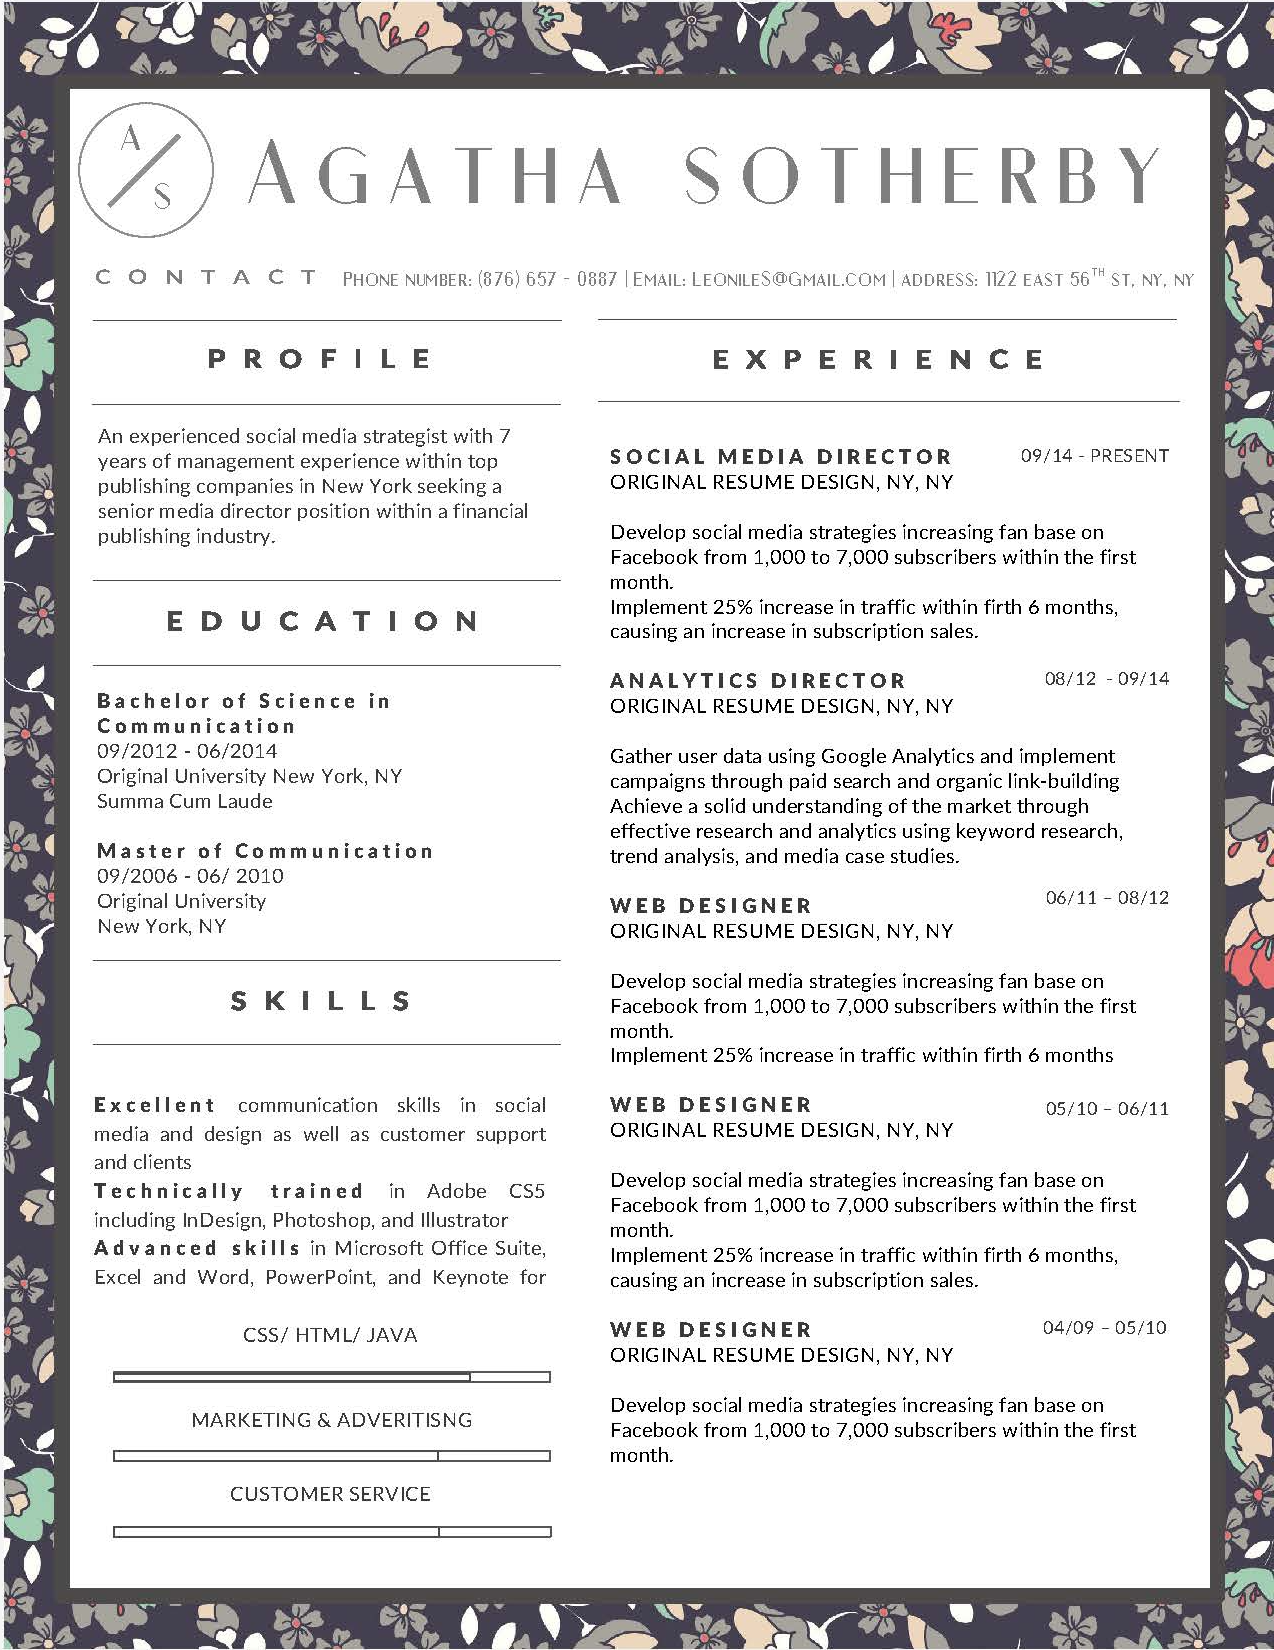 Downloadable Resume + Cover Template and Cover Letter Template for Microsoft Word and Apple Pages. This cover letter template is perfect for anyone in the fashion field. The template’s design is a modern, unique, colorful, and professional. WE SWEAT THE DETAILS, SO YOU DON’T HAVE TO Stand Out Shop resume templates for Microsoft Word and Apple Pages will help you design a modern and professional resume in minutes! Simply download, open in Microsoft Word or Apple Pages, and input your resume’s information. Increase your chances of landing your dream job with a job winning, modern, simple, and scannable resume template for Microsoft Word and Apple Pages. Creating a resume shouldn’t suck Simply download a resume template from Stand Out Shop, enter your information in Microsoft Word or Apple Pages and get a beautifully formatted resume in seconds. Create a unique and vivid resume in minutes. Make an impressive resume. Customize your own layout in Microsoft Word or Apple Pages and introduce yourself in an impressive way. You can download your resume at any time. Stand out from other job seekers with a beautiful professional design.